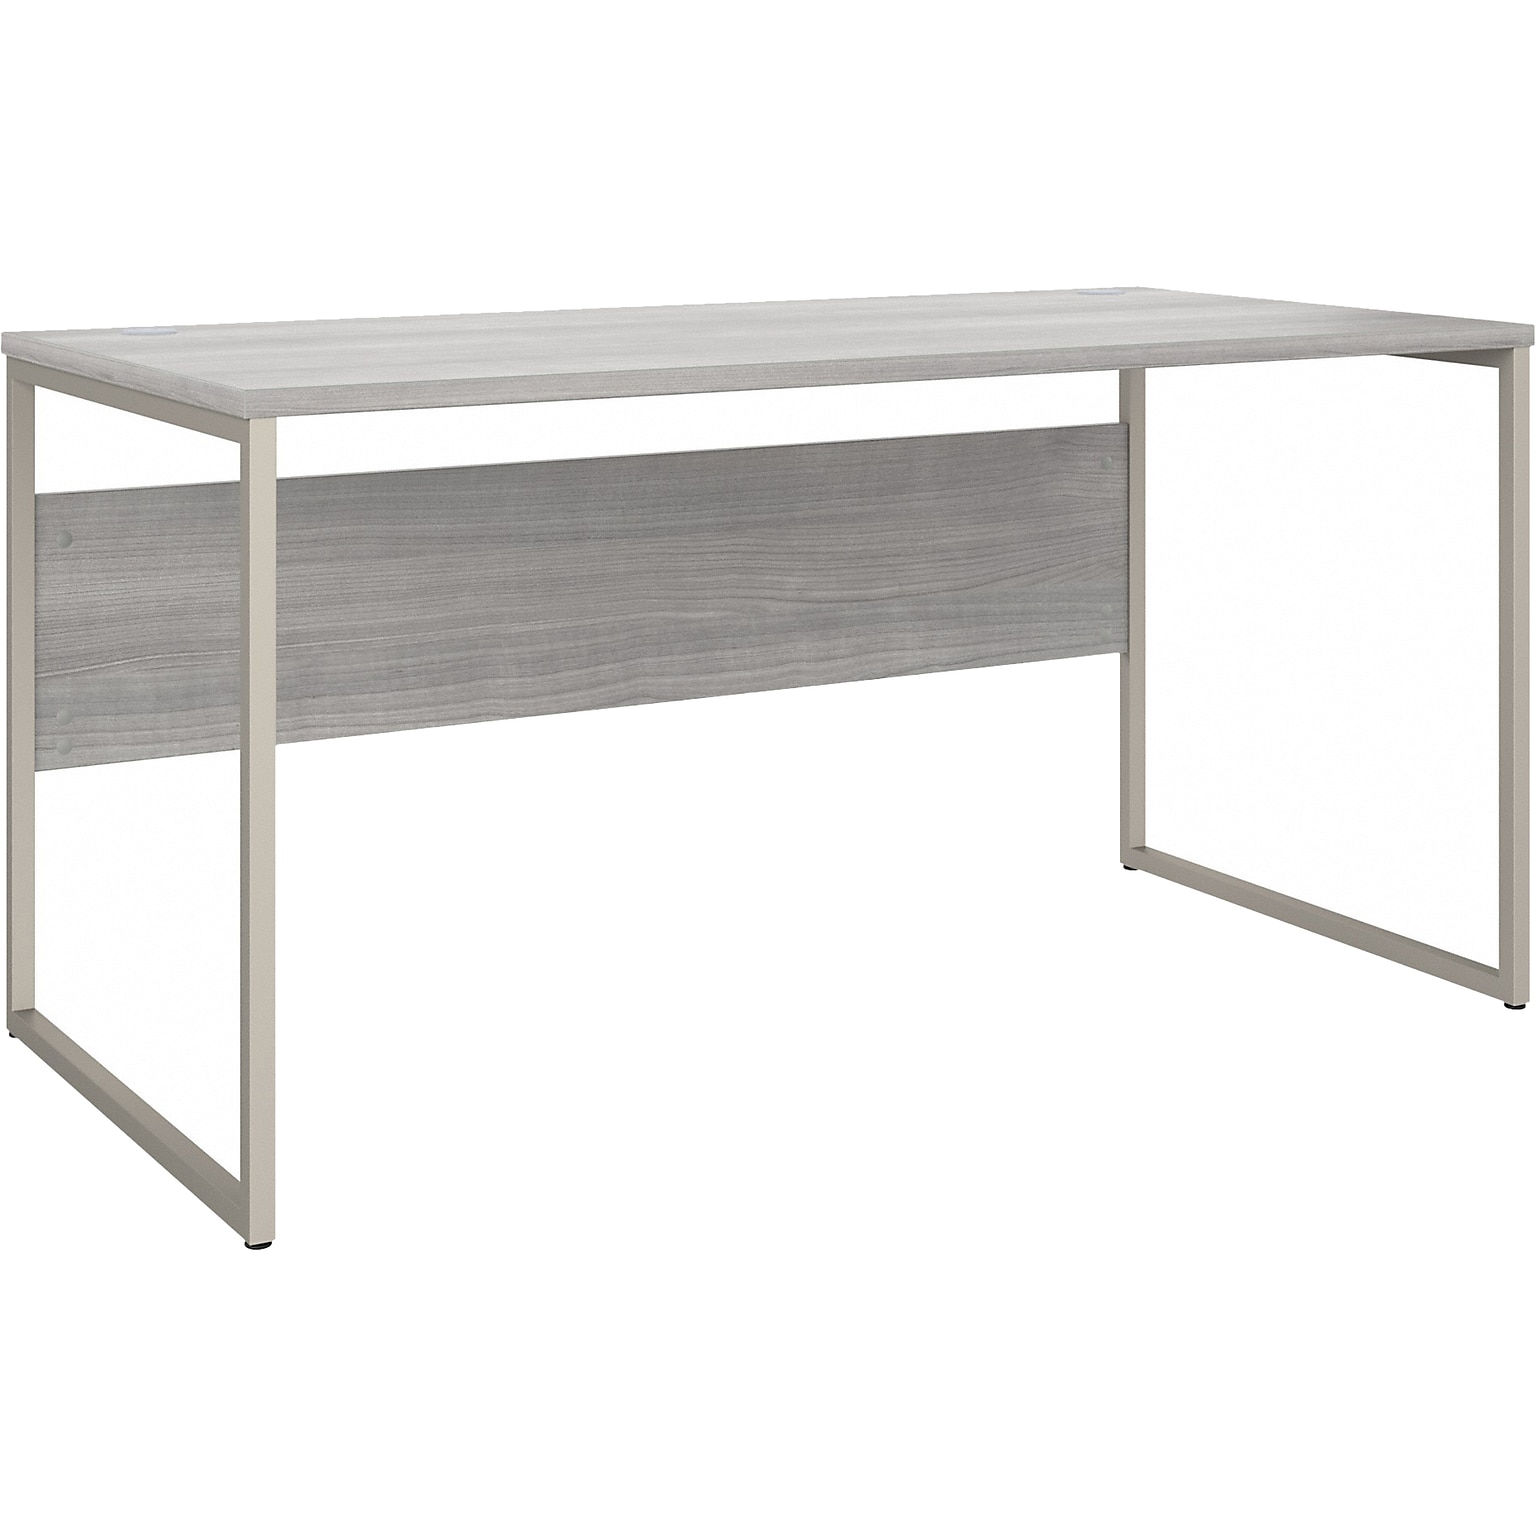 Bush Business Furniture Hybrid 60W Computer Table Desk with Metal Legs, Platinum Gray (HYD360PG)